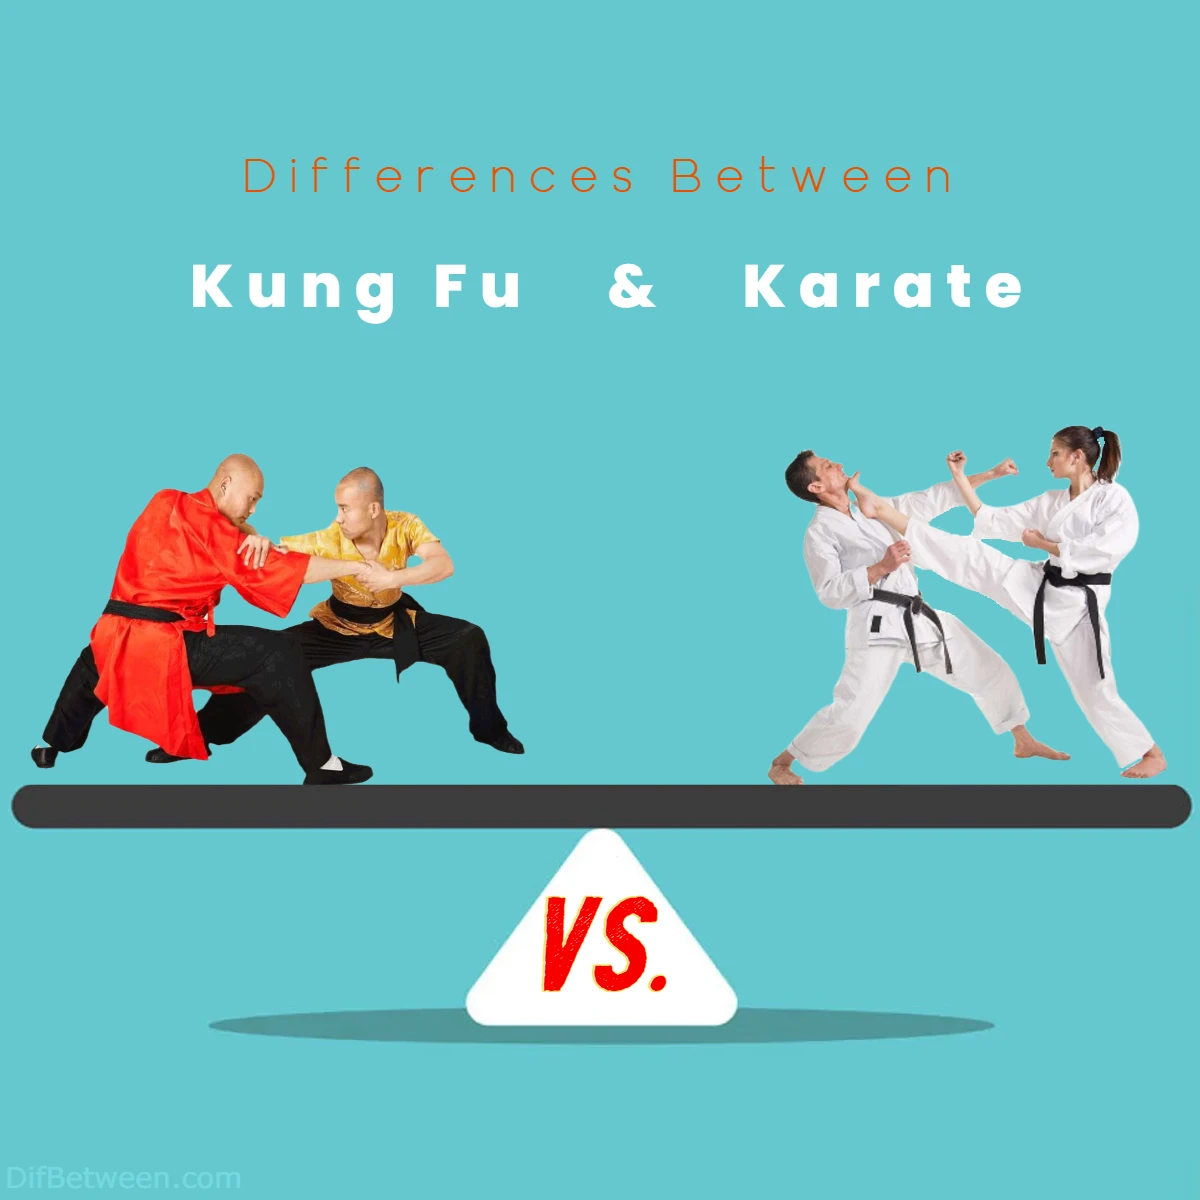 Differences Between Kung Fu vs Karate